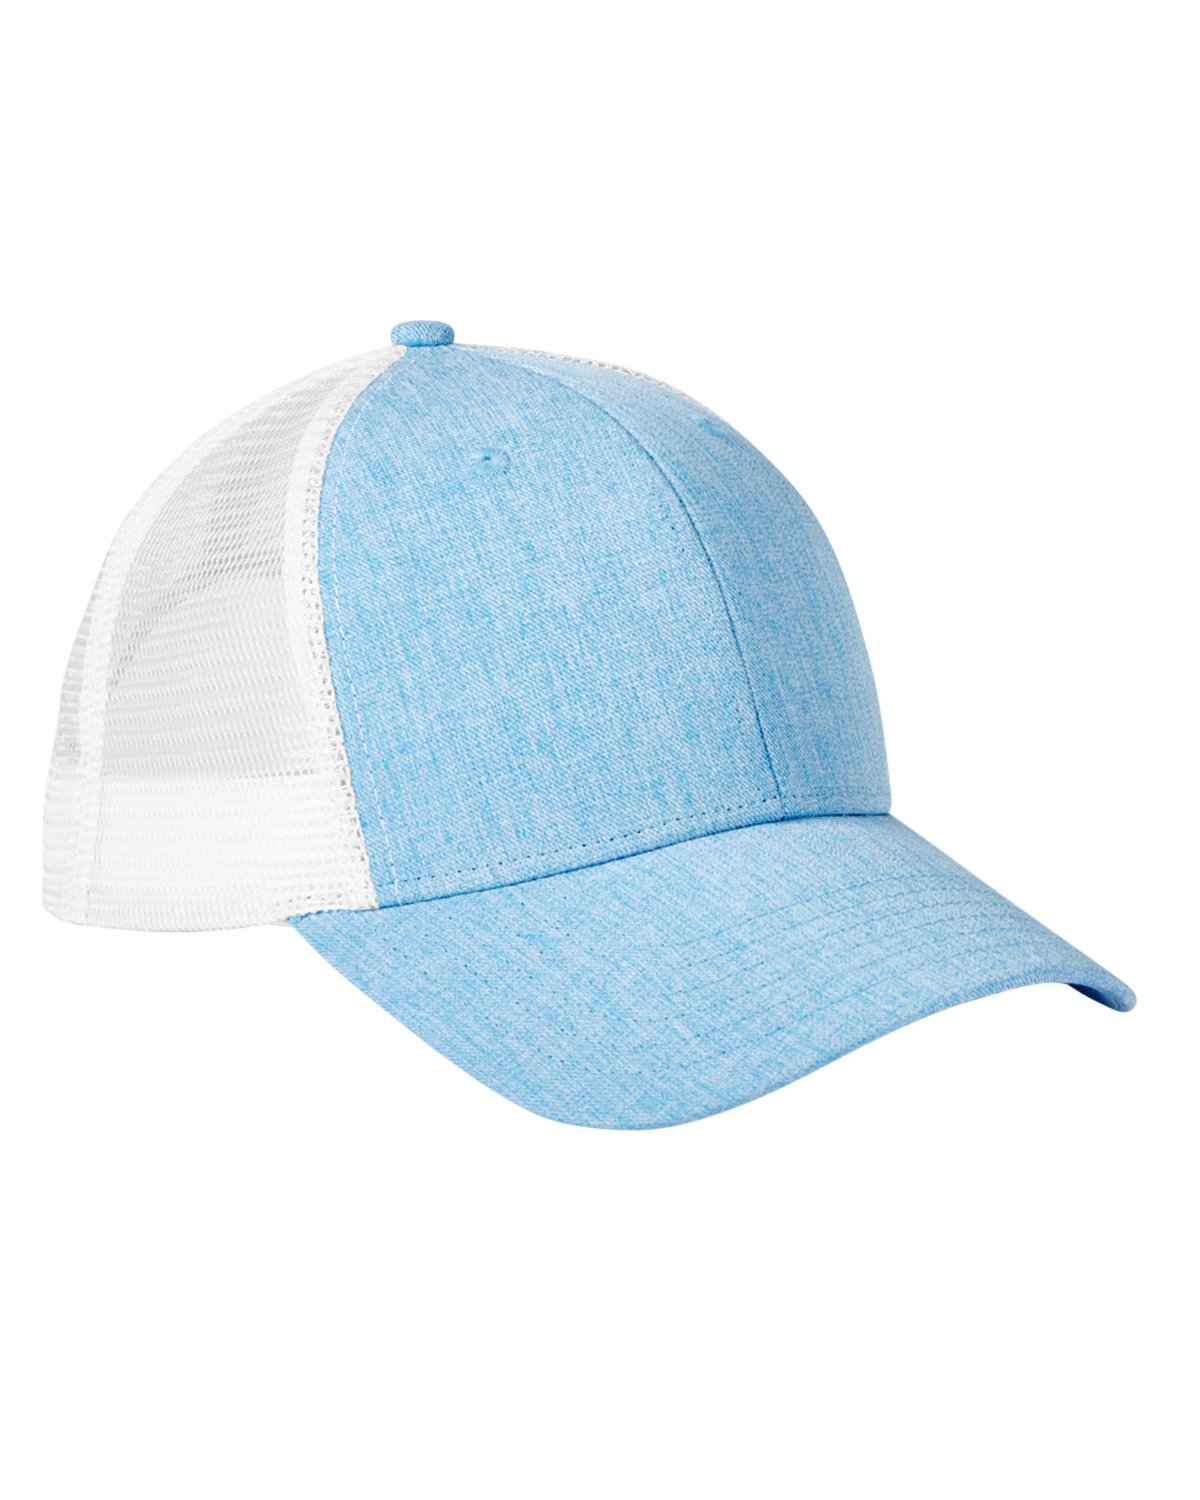 click to view HTH LT BLU/WHT